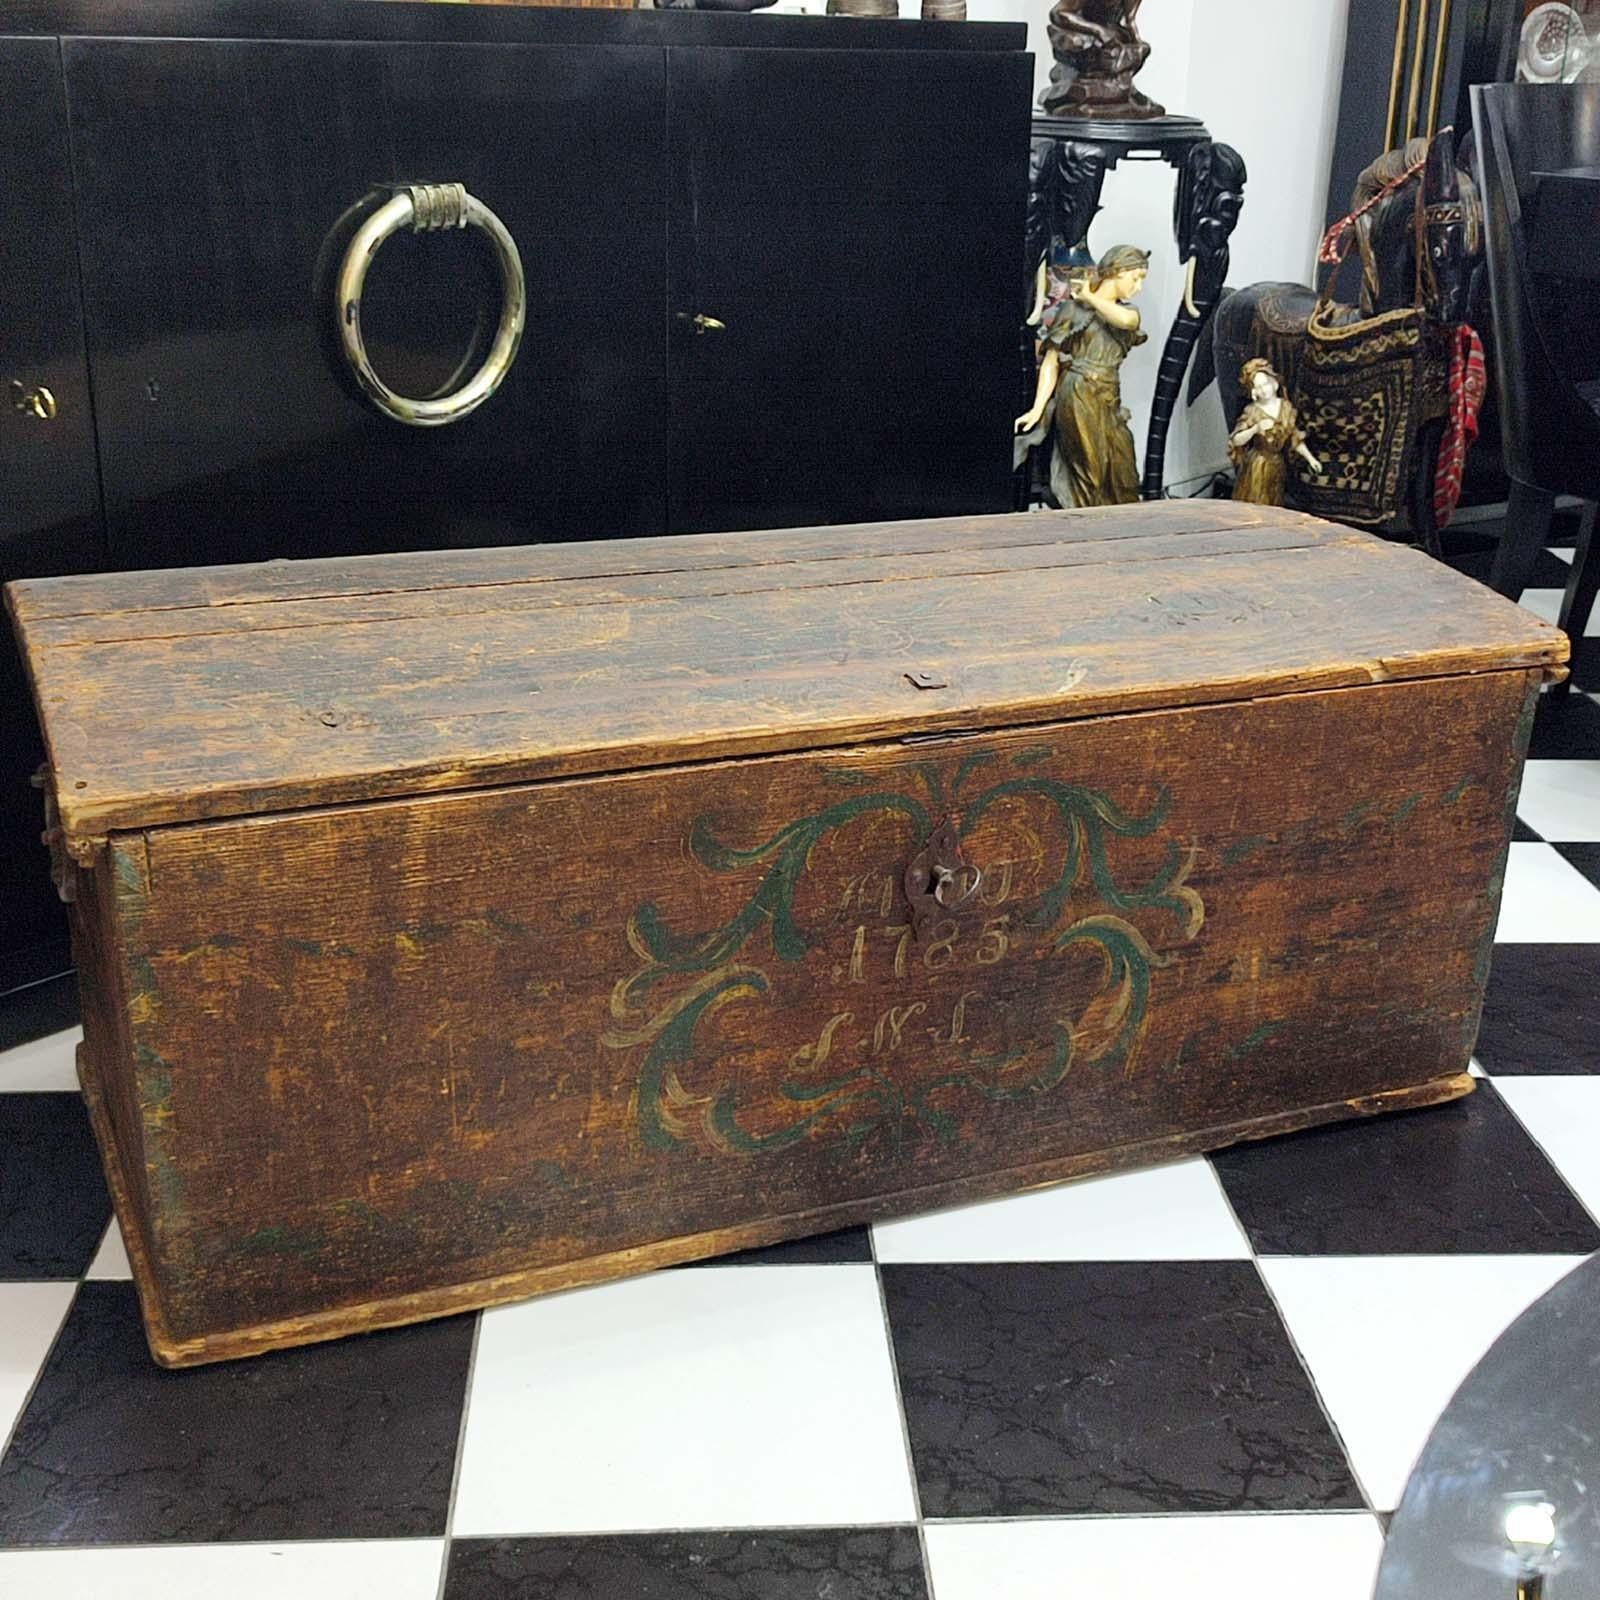 An original condition 18th century domed-top dowry chest, painted with floral motif and dated 